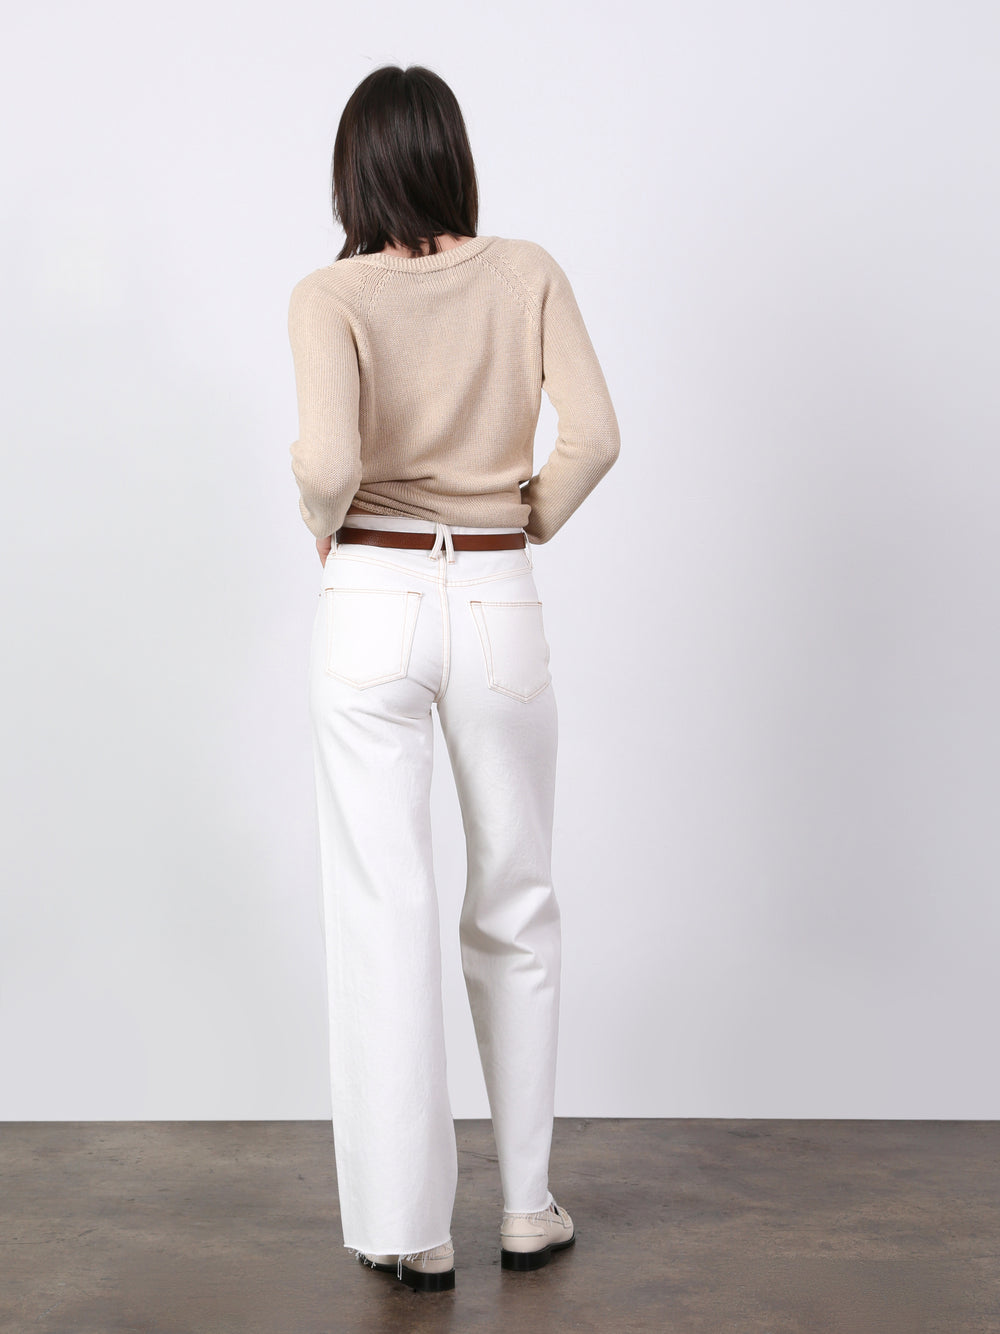 Grace Jeans - Natural White